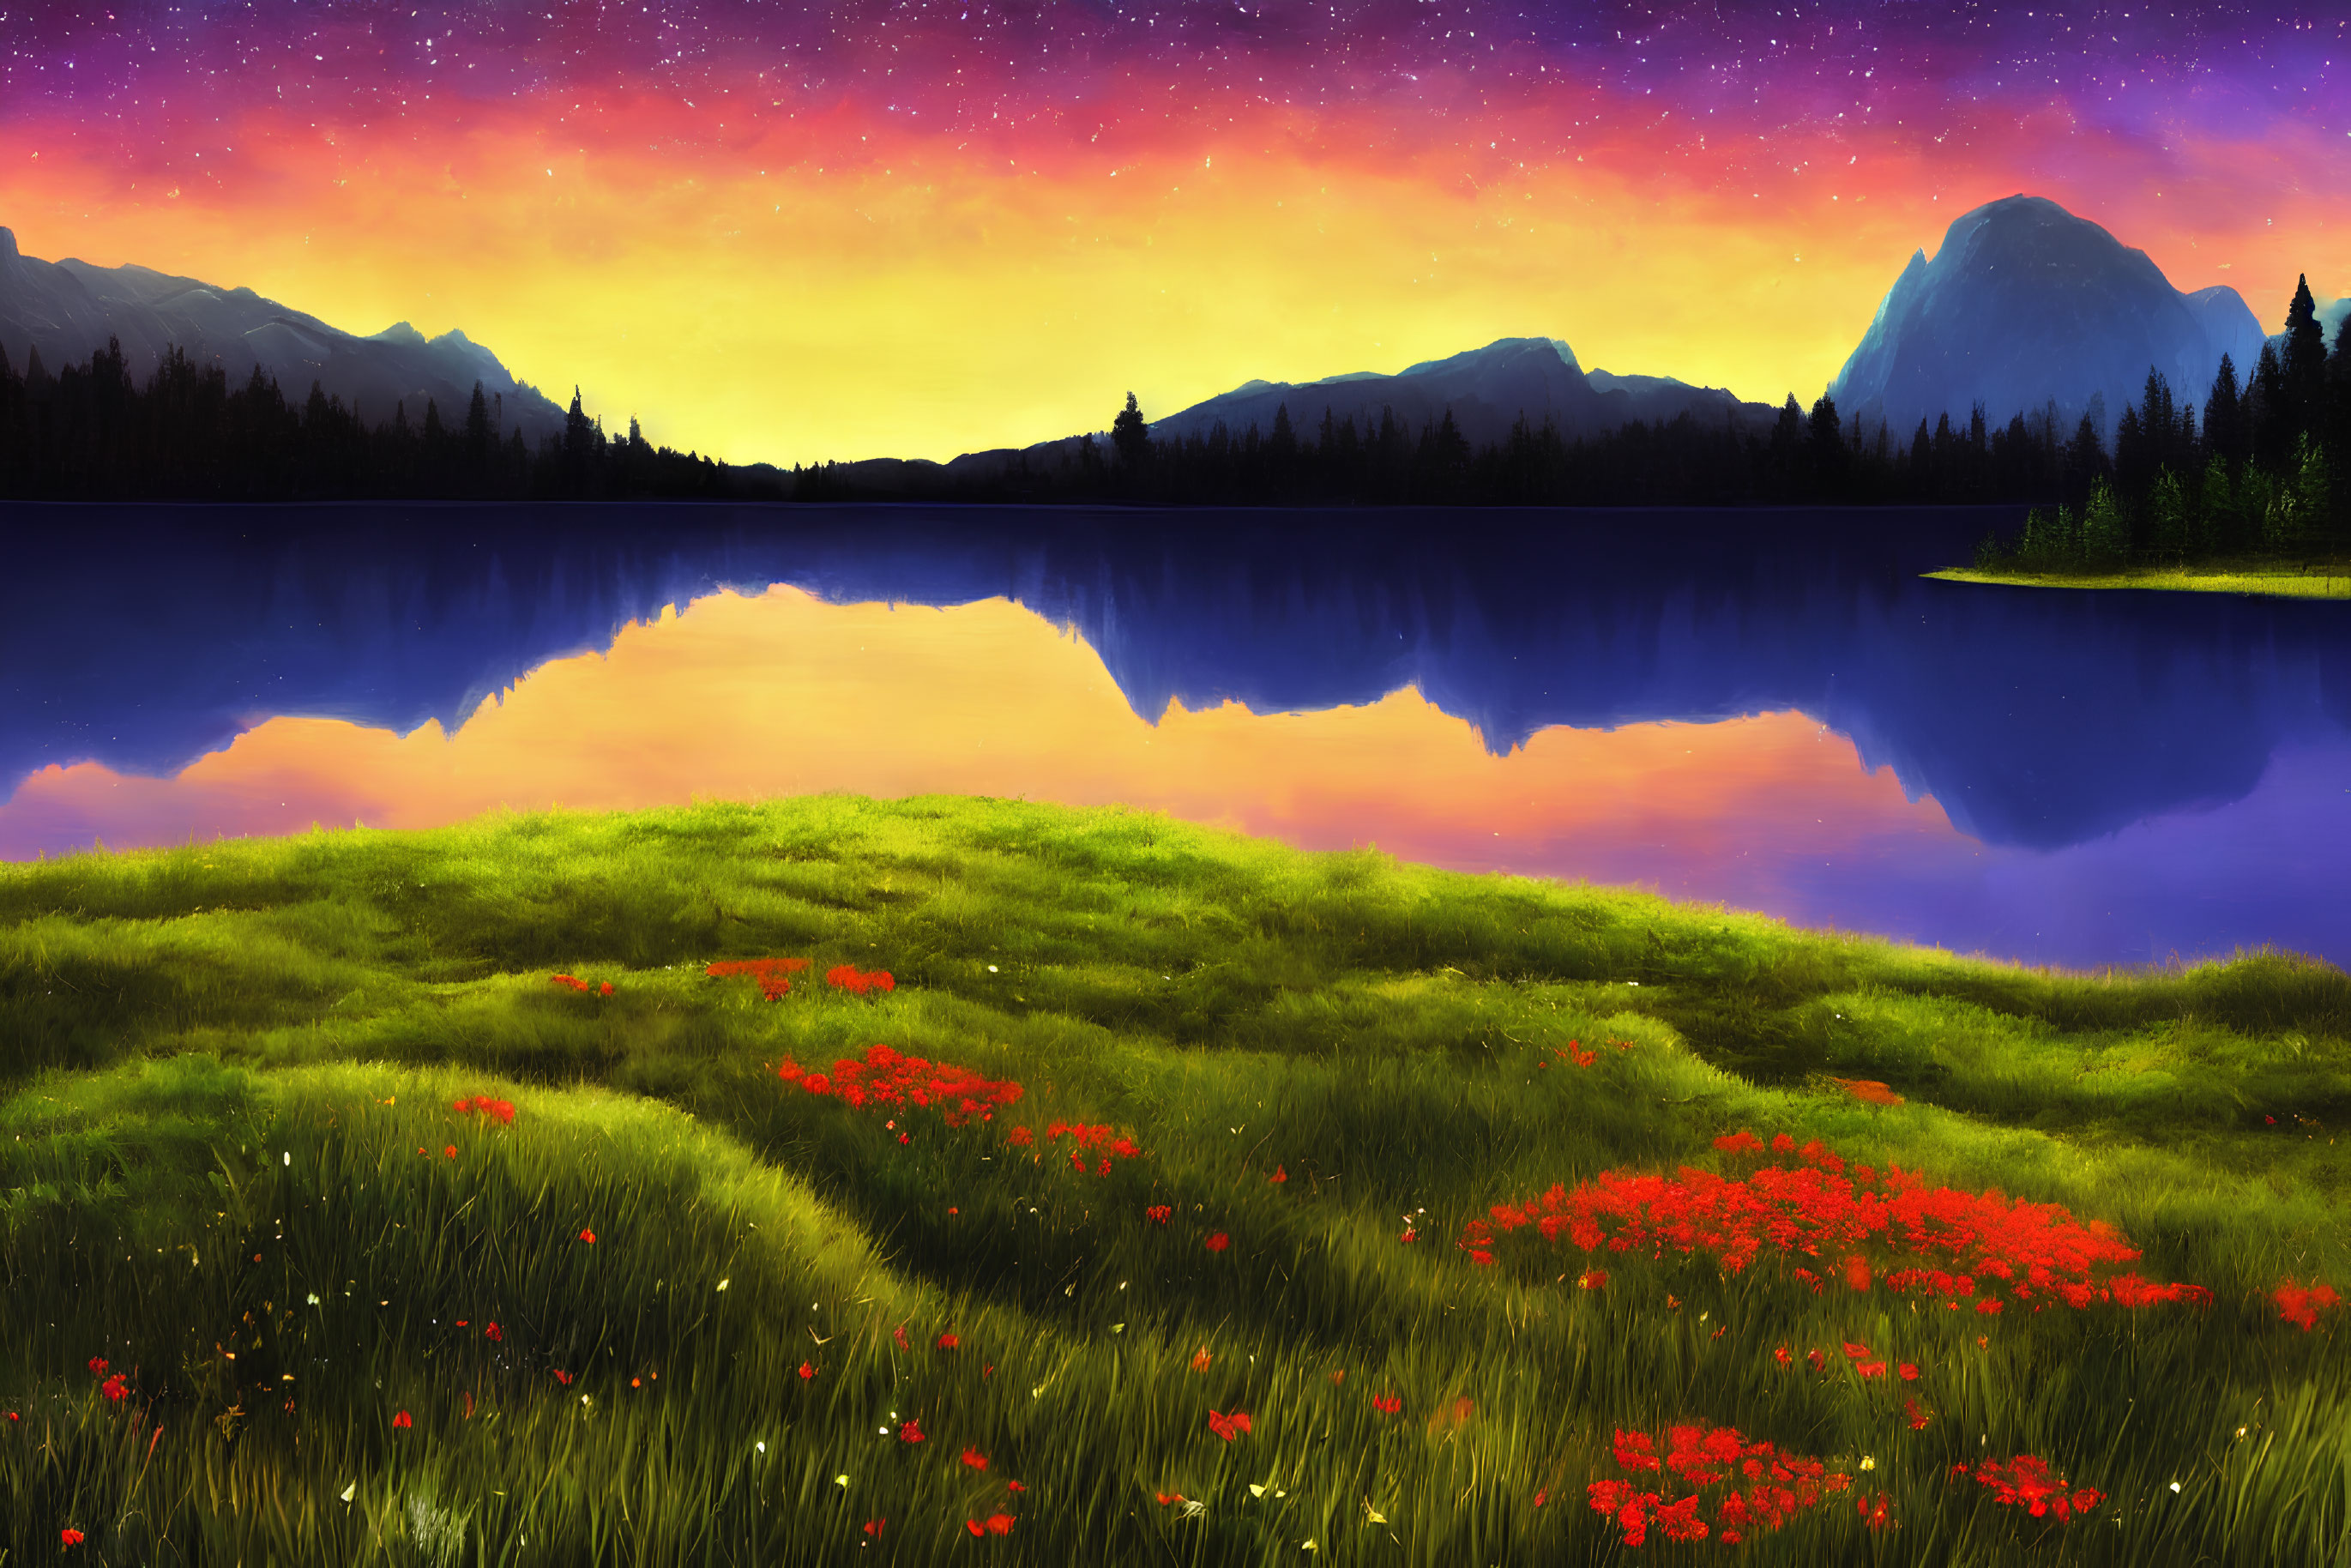 Scenic sunset over tranquil lake with mountains and meadows